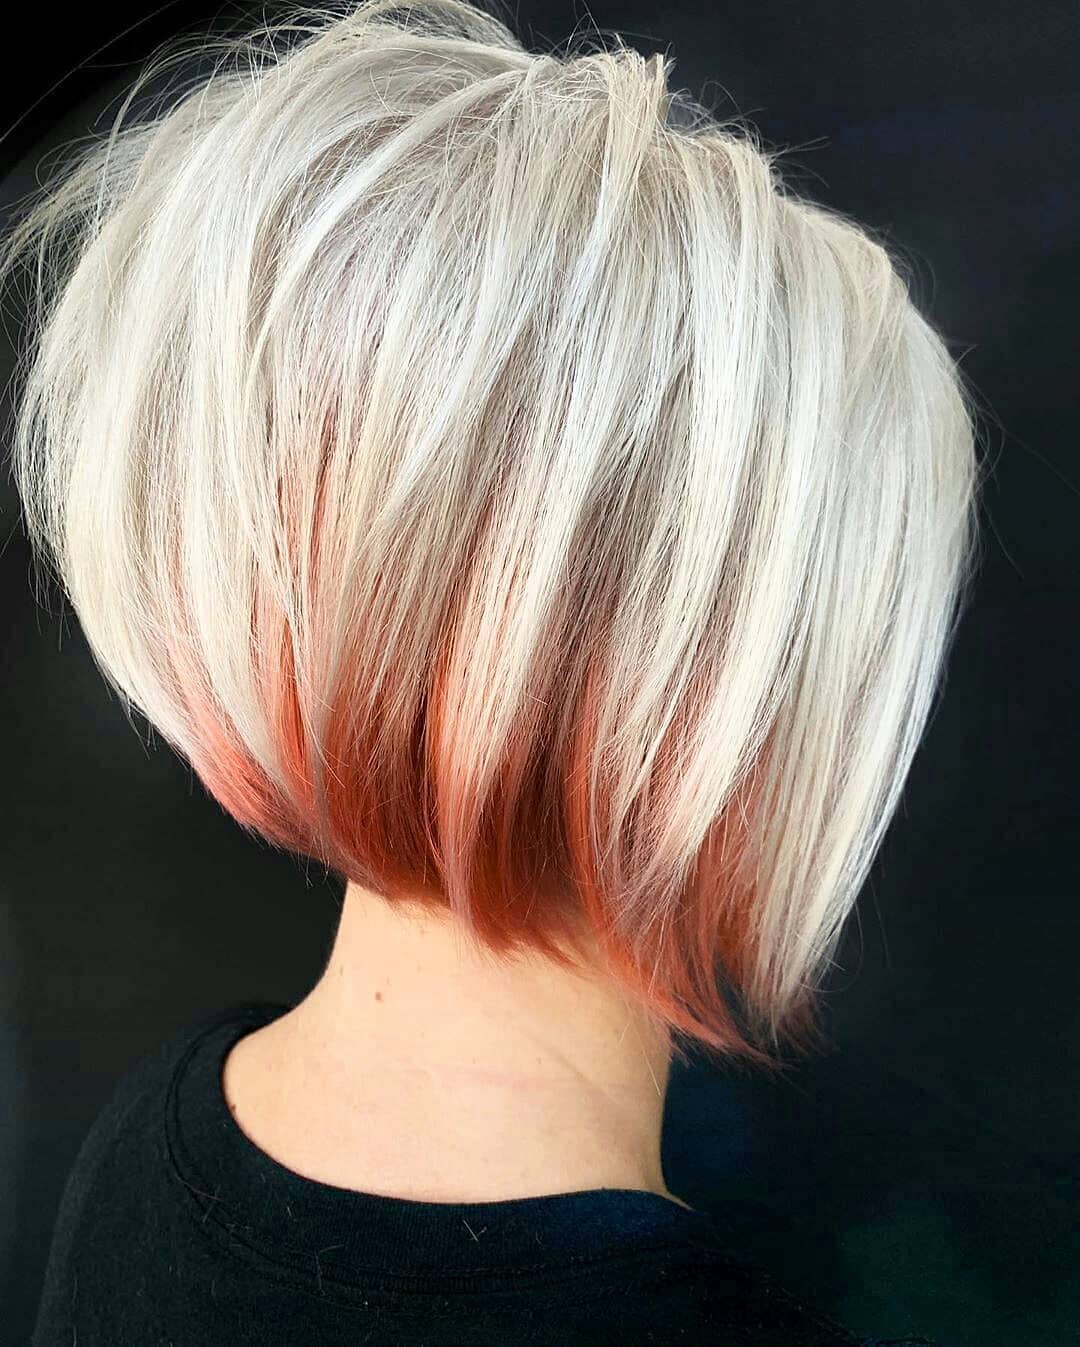 Stylish Short Bob Haircut Ideas for Women - Easy Short Straight Hairstyle and Color 2021 - 2022